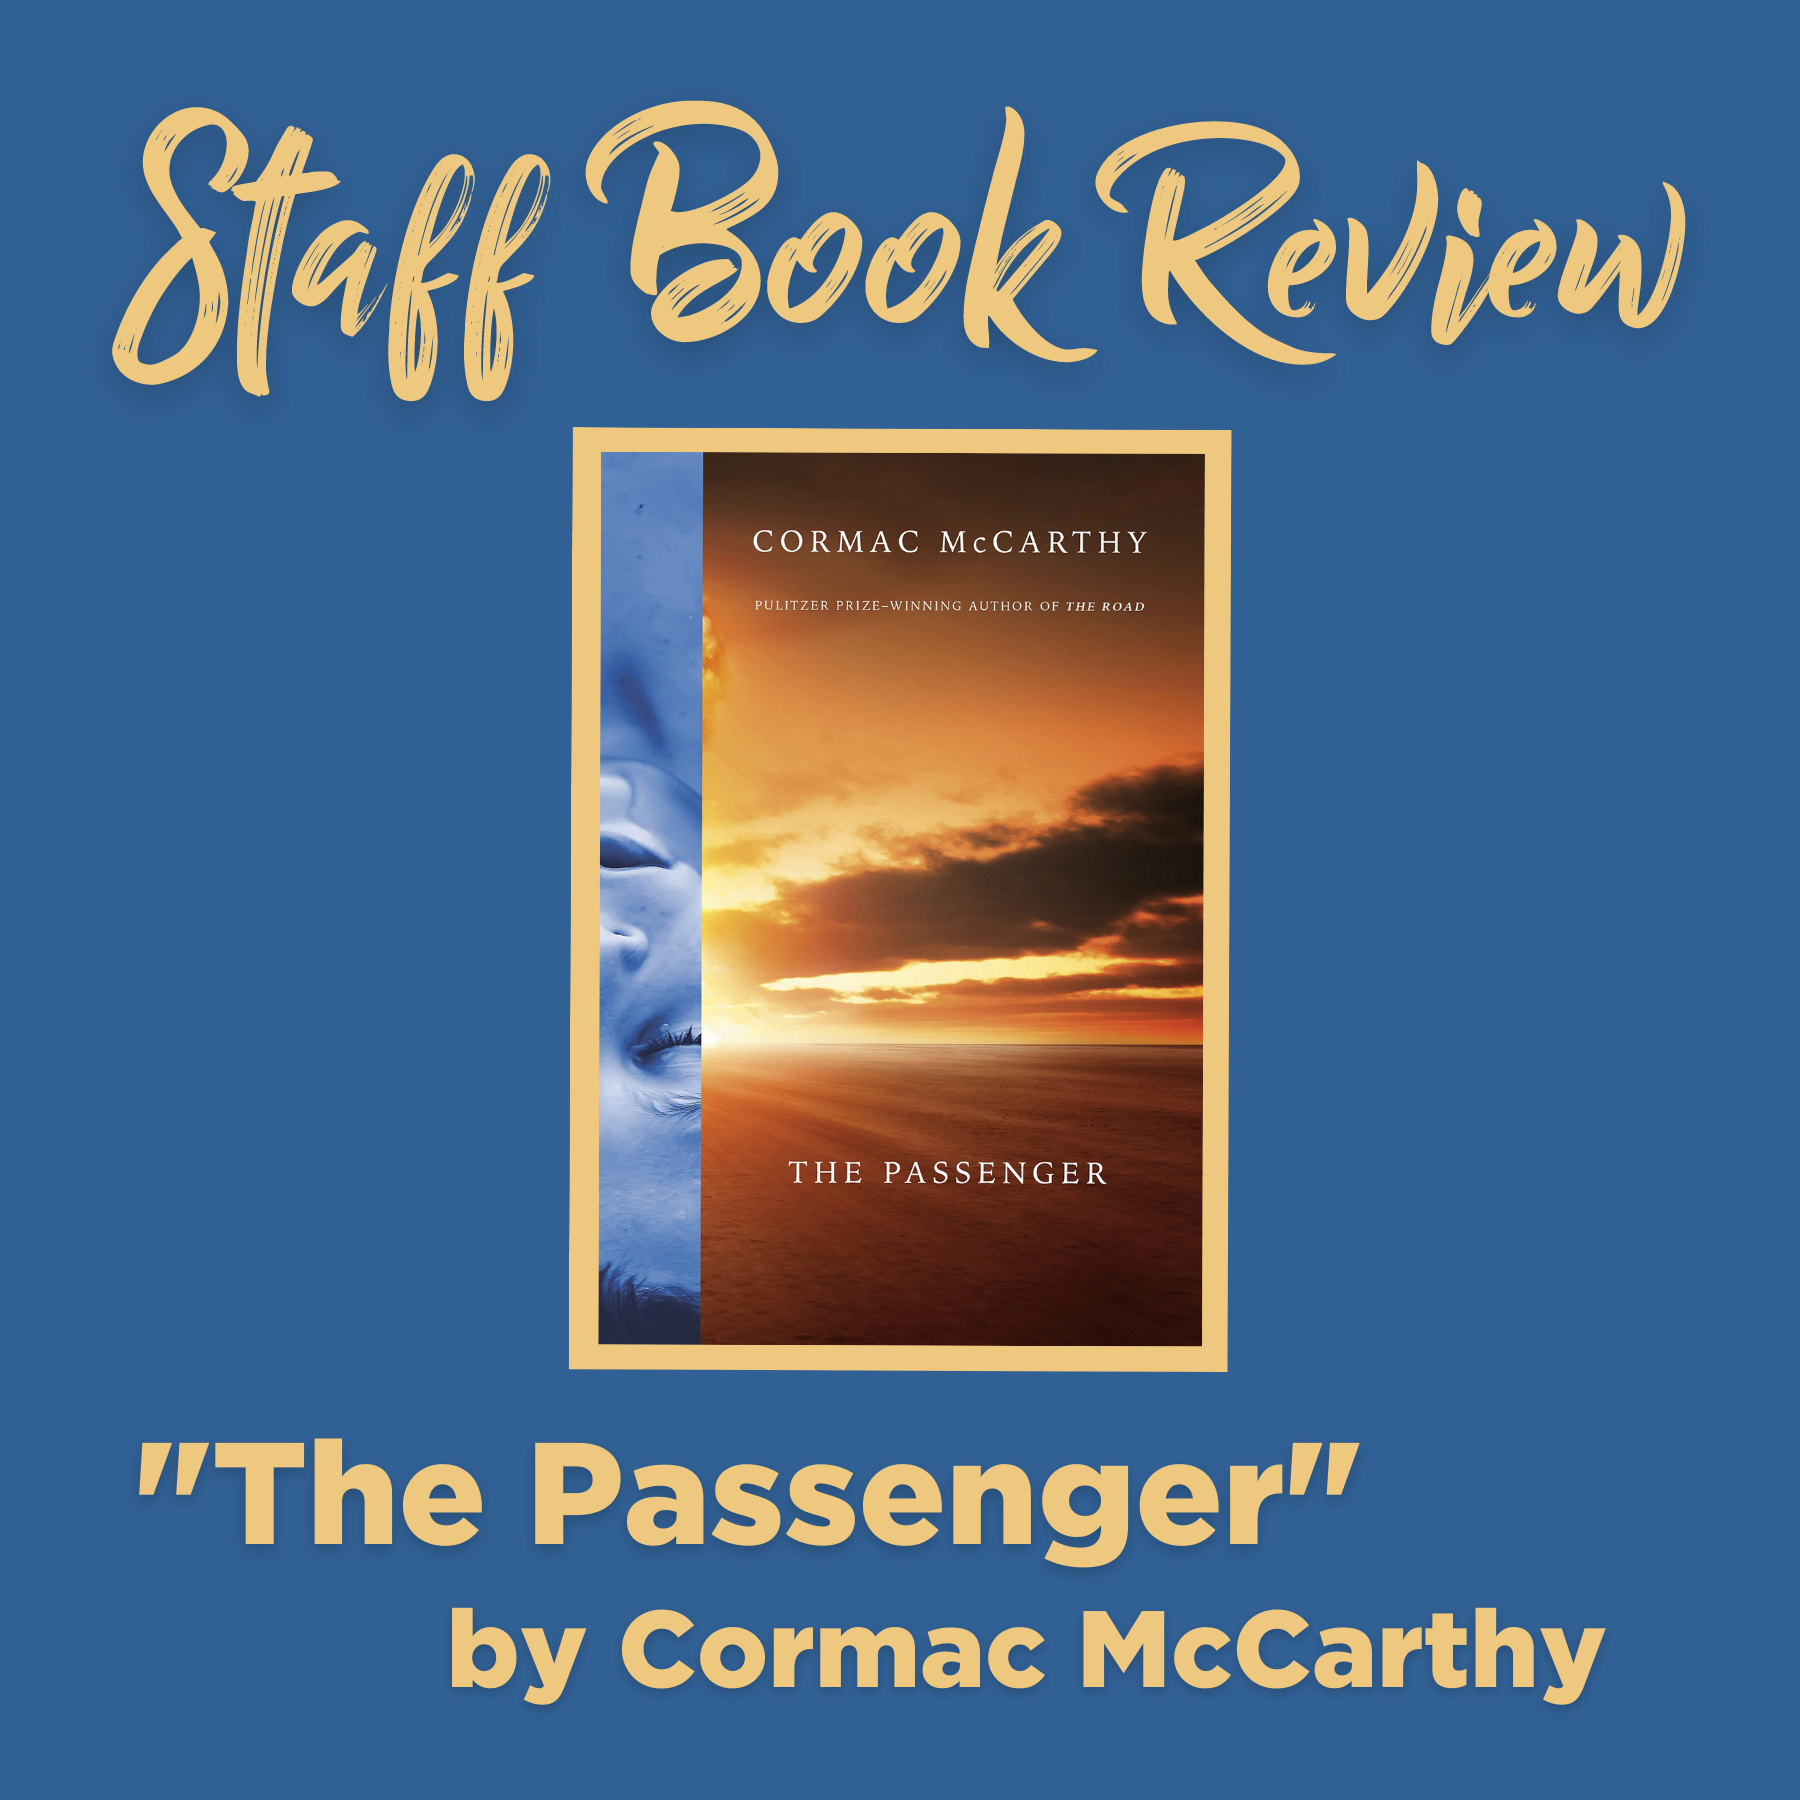 Characters Plumb Emotional Depths in “The Passenger” – Johnson